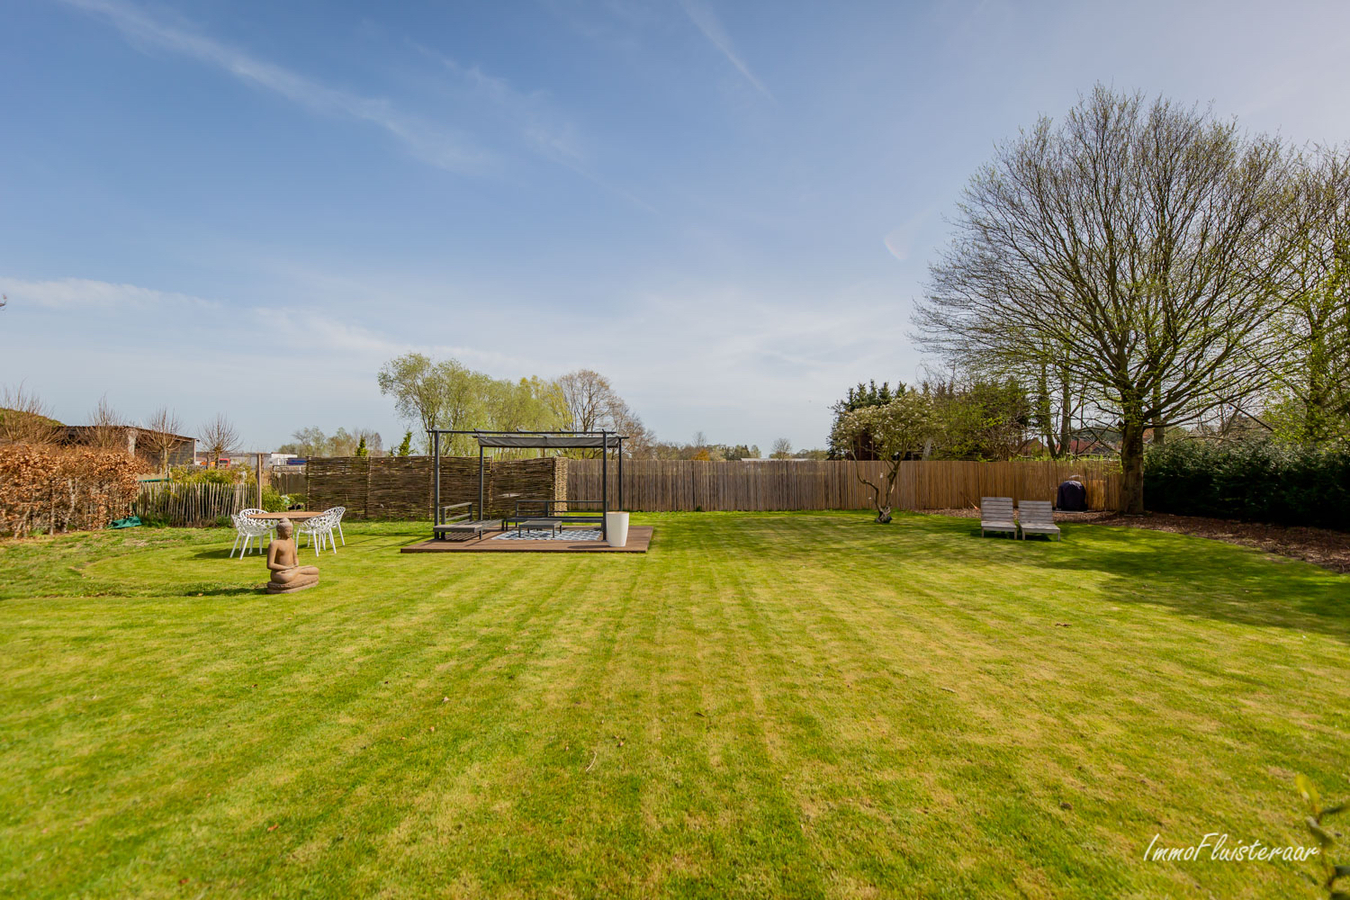 Property for sale |  with option - with restrictions in Geel